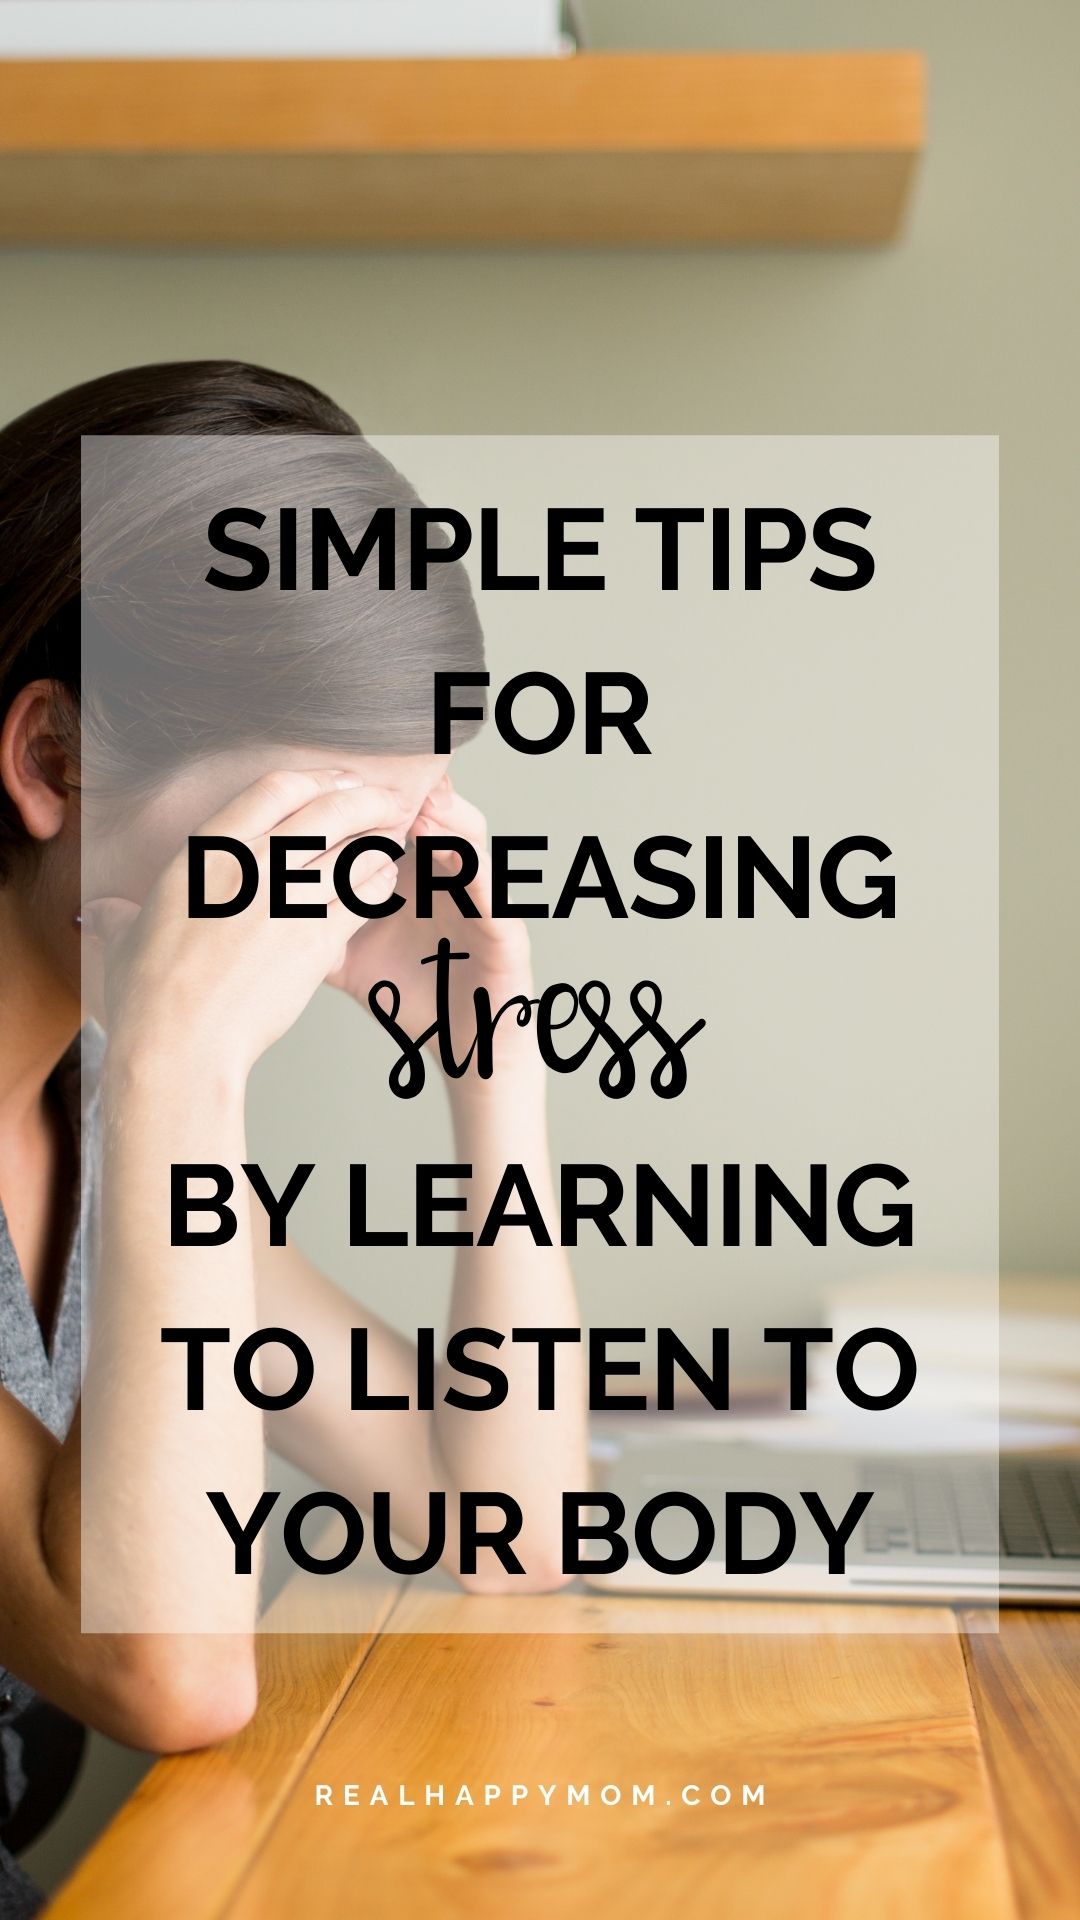 Simple Tips for Decreasing Stress by Learning to Listen to Your Body